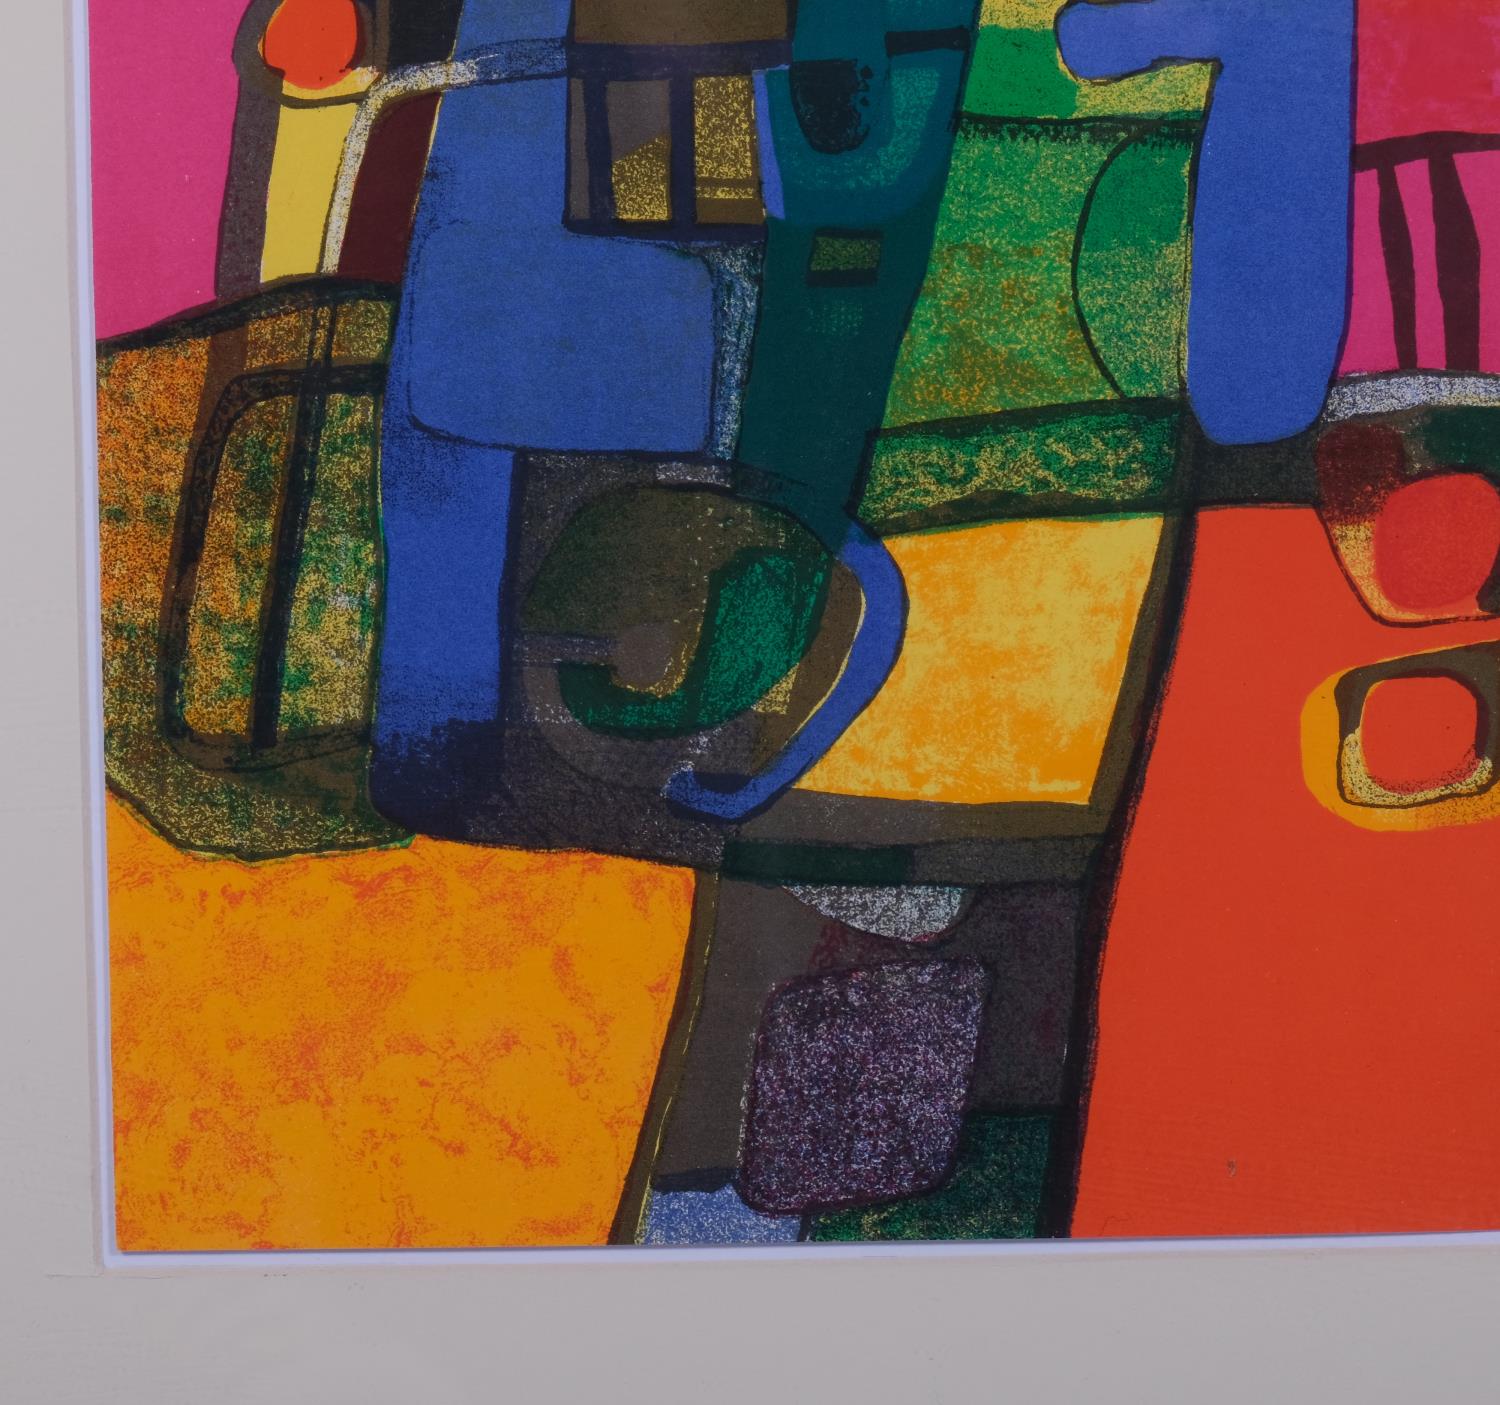 Maurice Esteve (1904 - 2001), abstract composition, original lithograph issued XX Siecle 1968, no. - Image 3 of 4